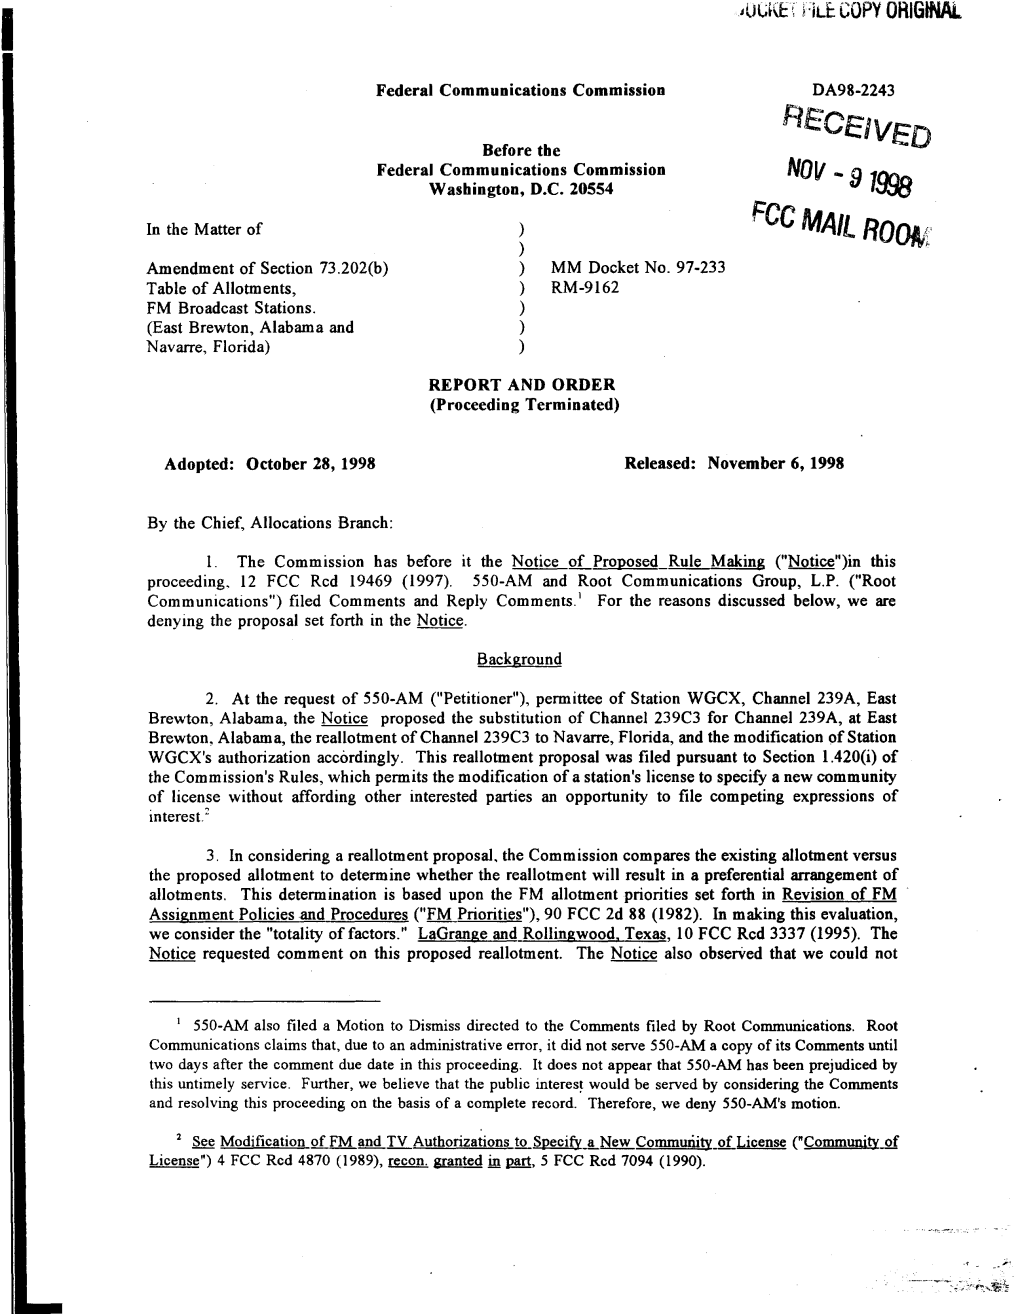 RE:Ccived Before Tbe Federal Communications Commission Wasbington, D.C